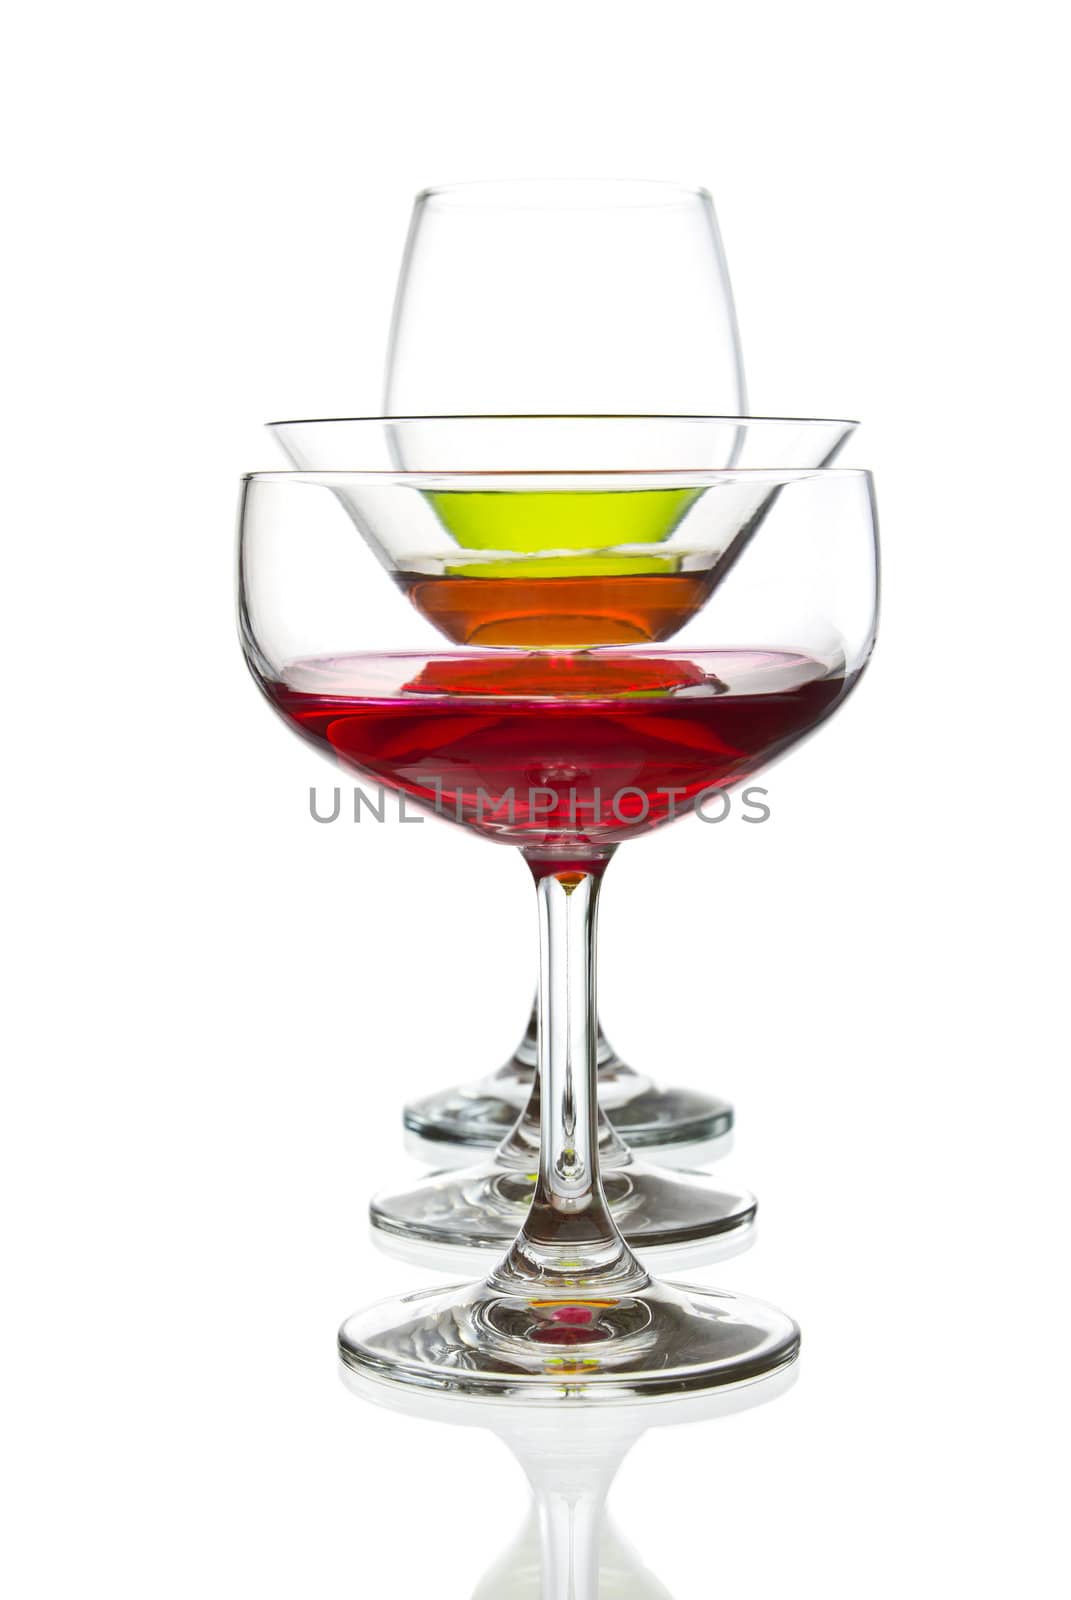 wine glass and red cocktail isolated by tungphoto